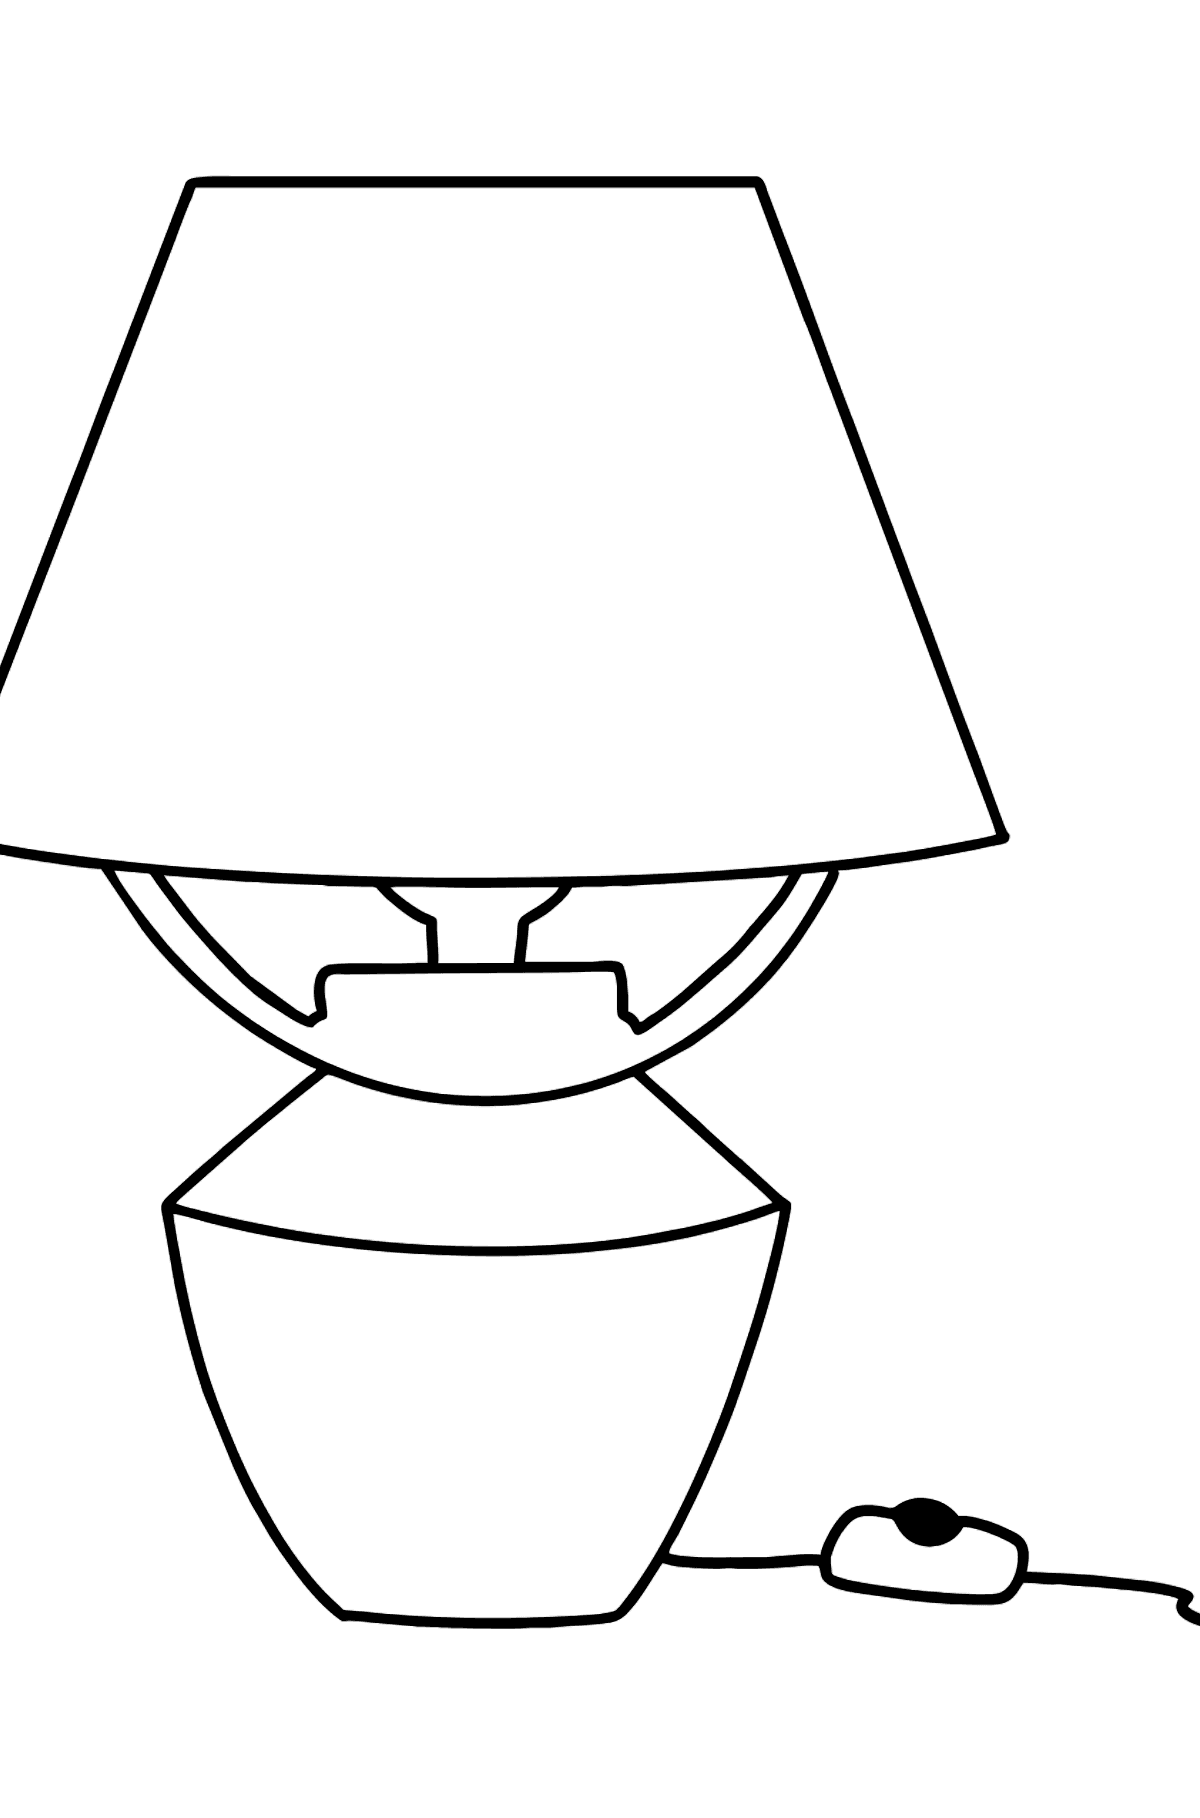 Bedside Lamp coloring page - Coloring Pages for Kids